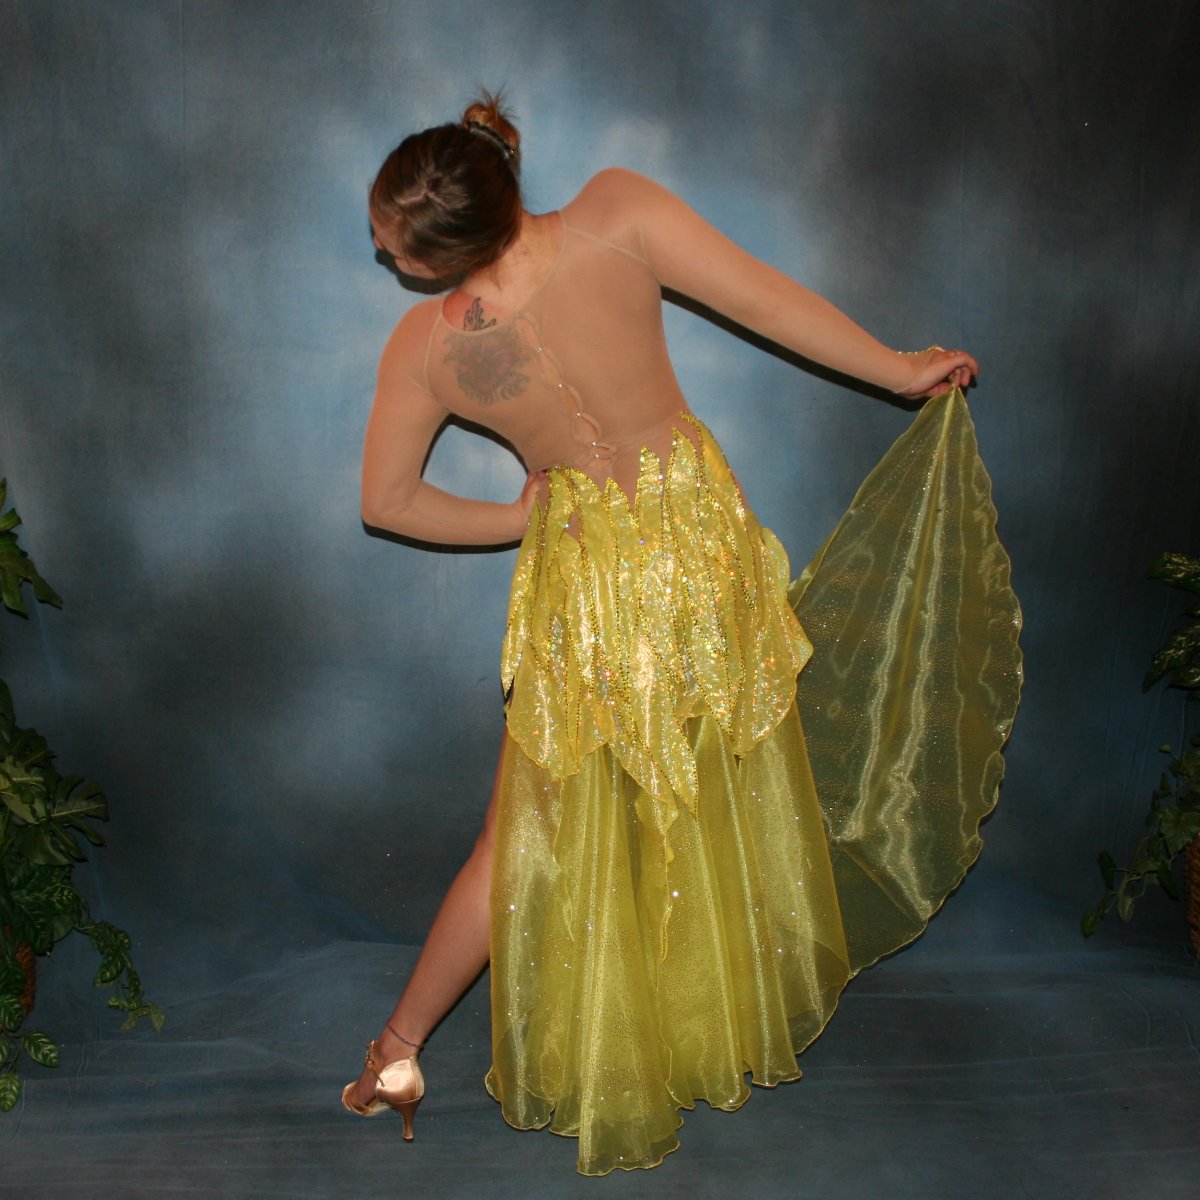 Crystal's Creations back view of Yellow converta ballroom dress consisting of Latin/rhythm dress created of yellow hologram lycra, with handcut petal appliques overlaid artistically on nude illusion base,embellished with citrine & jonquil ab Swarovski rhinestones, with converta skirt of yards of glittered organza.